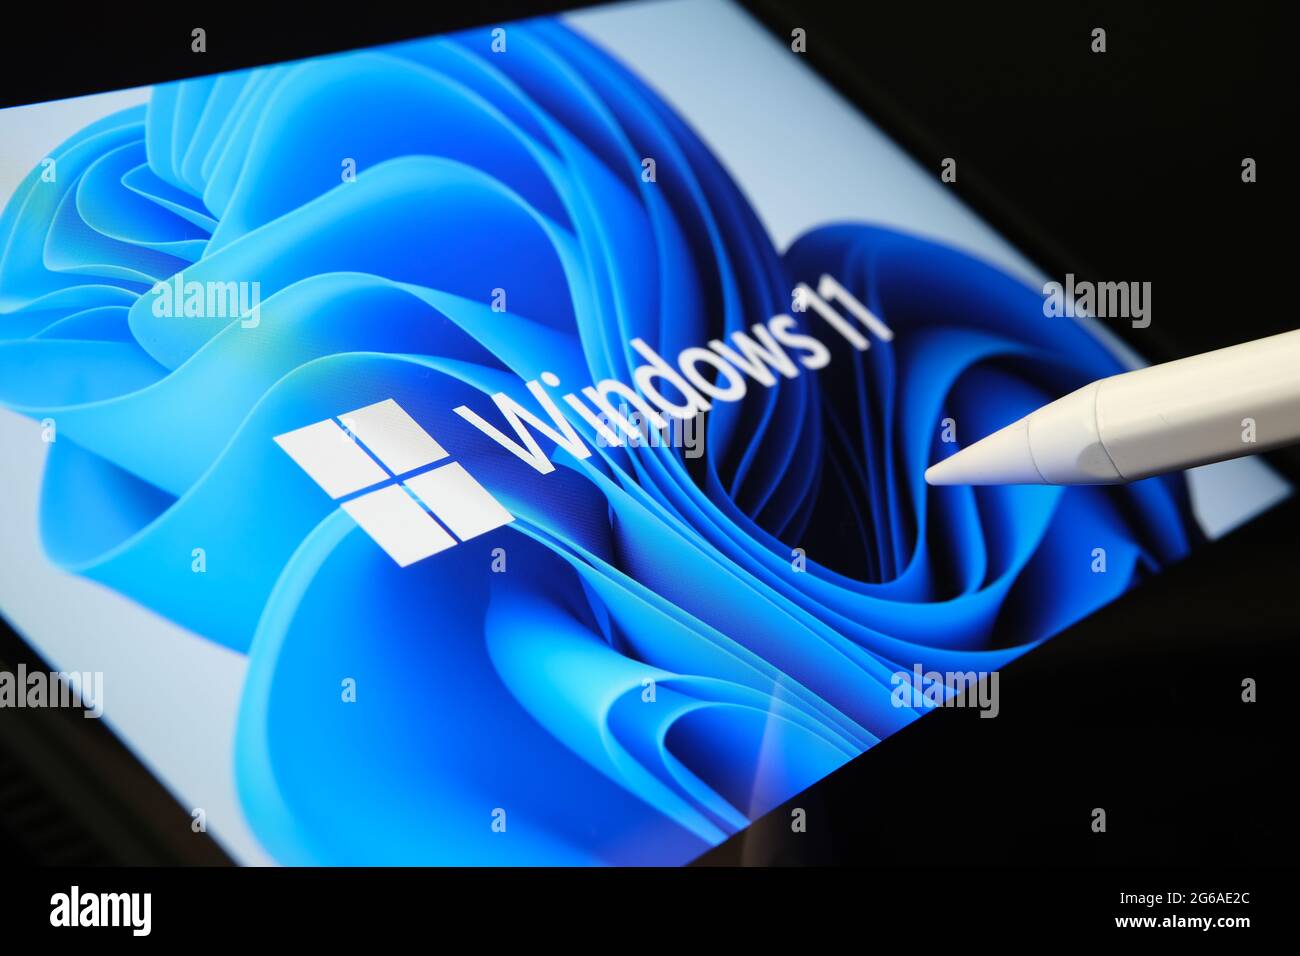 Windows 11 logo seen on the screen of tablet and user pointing at it with stylus. Stafford, United Kingdom, July 1, 2021 Stock Photo